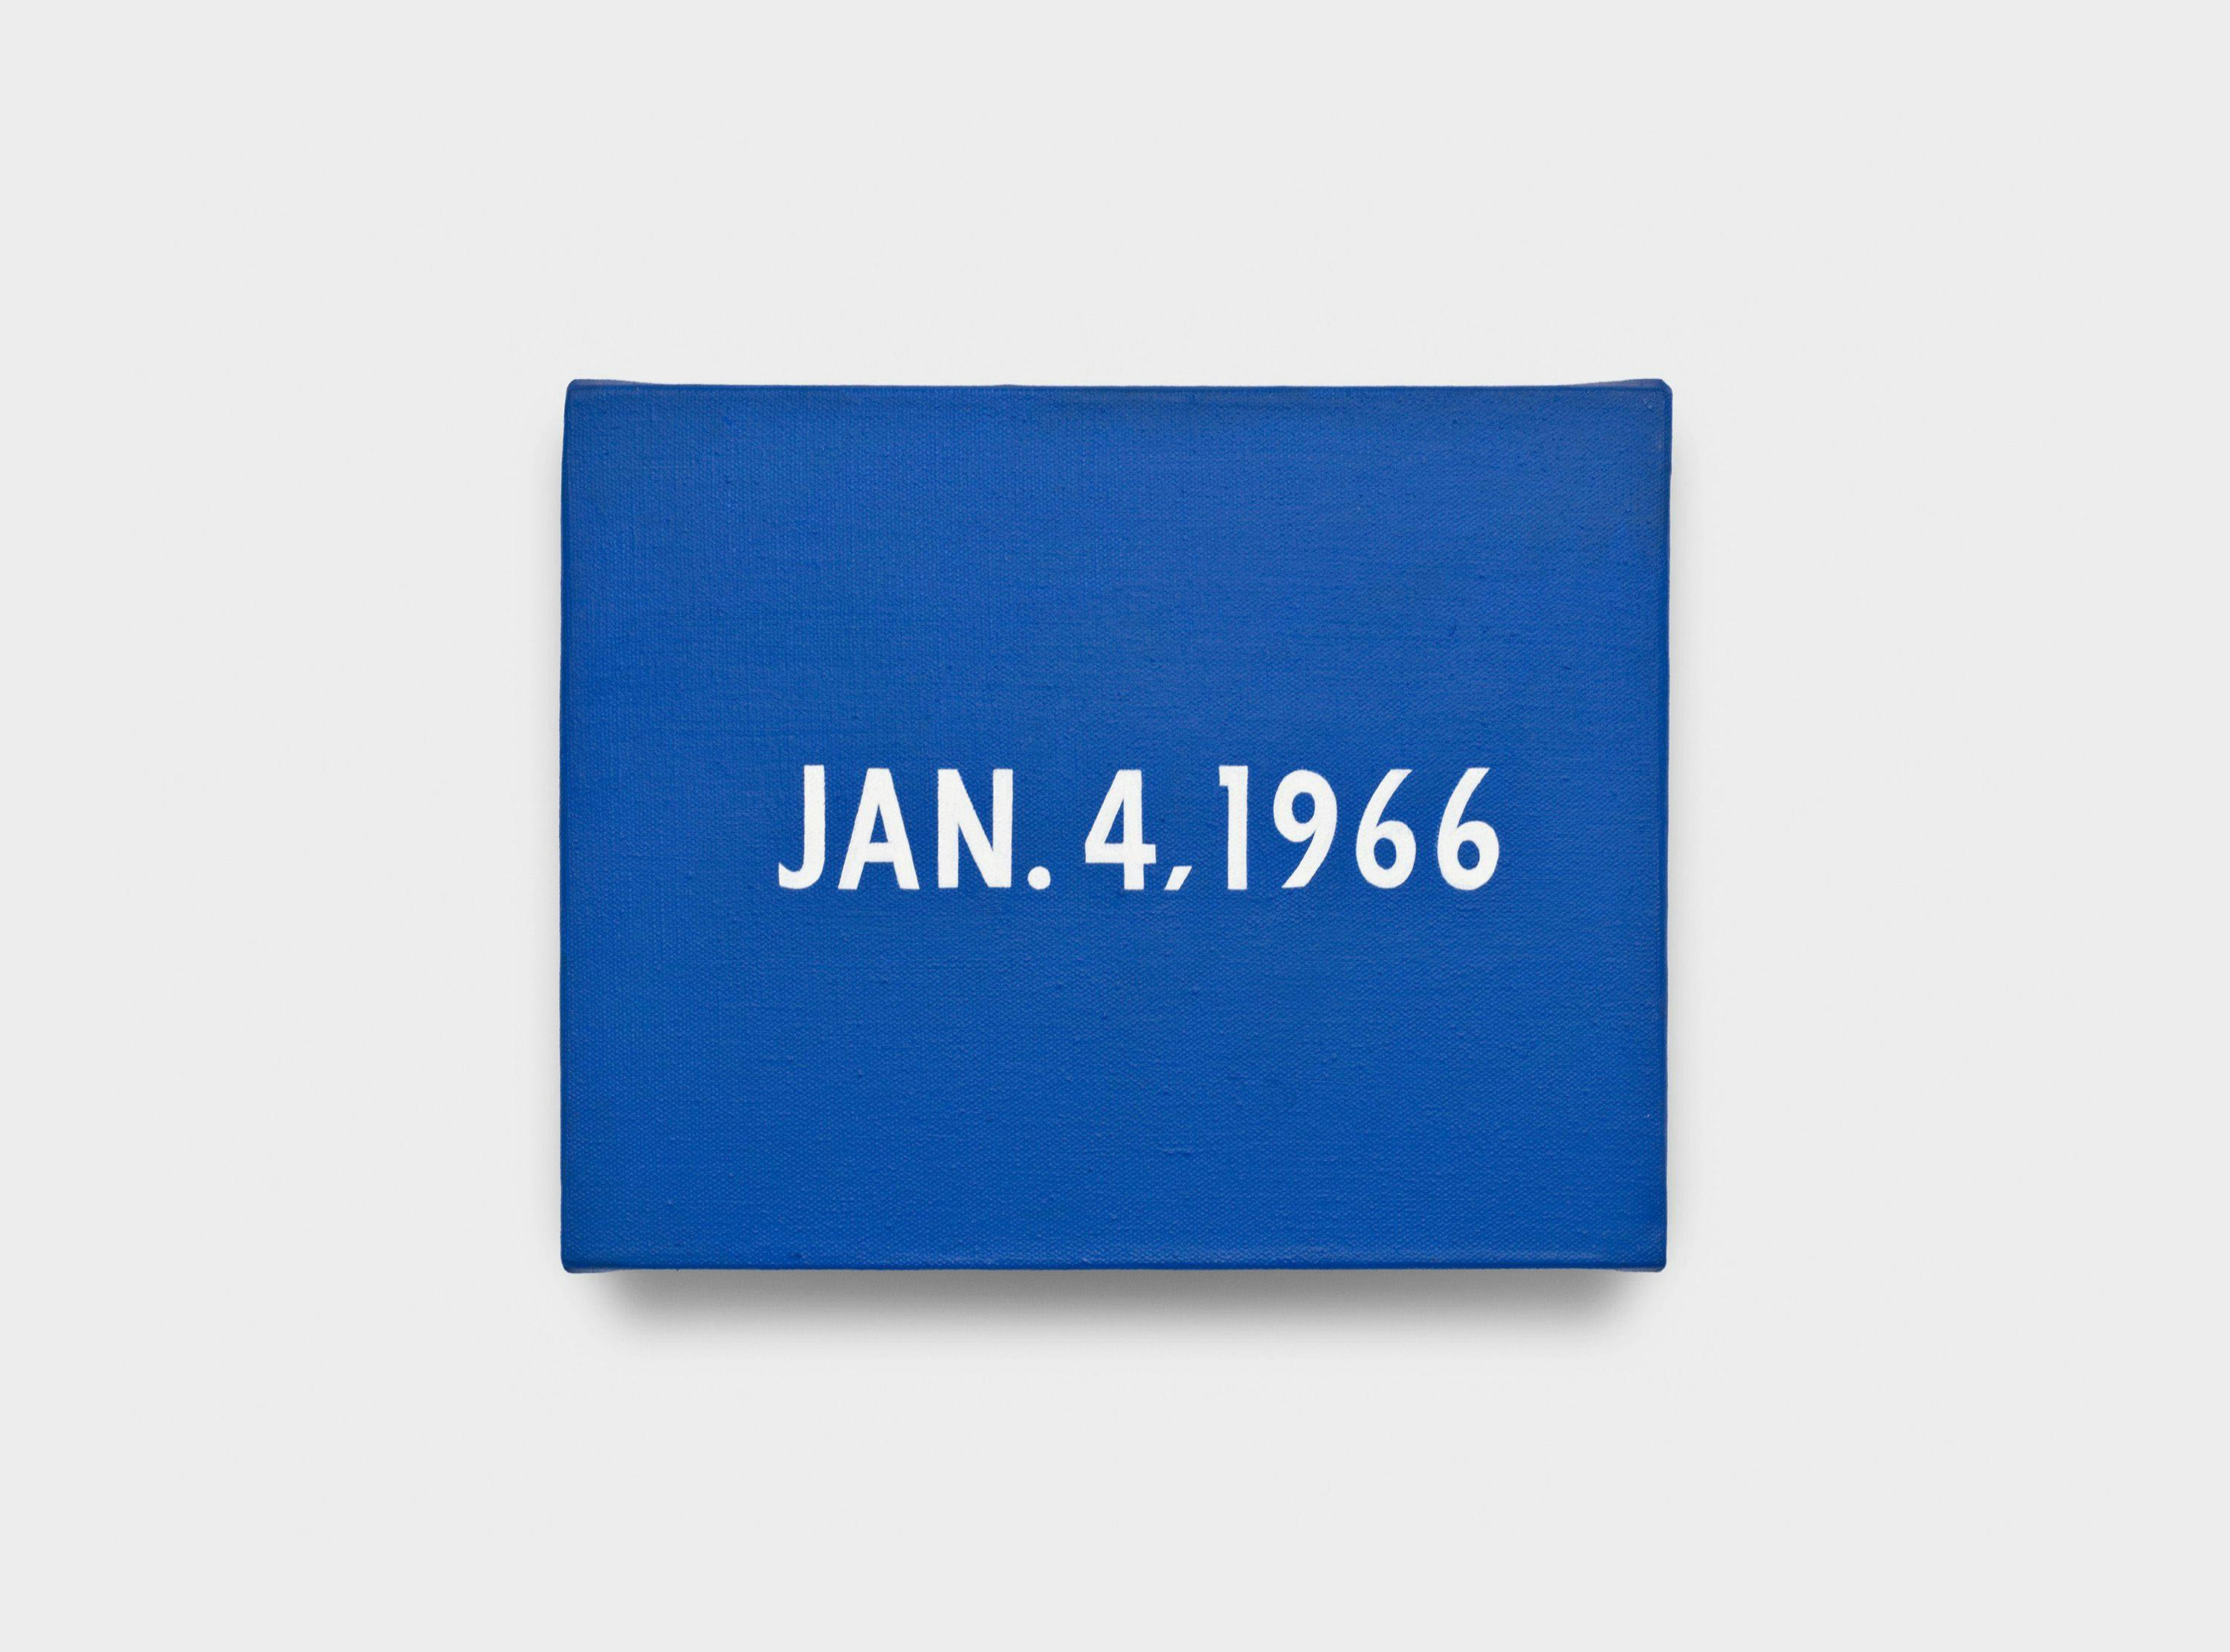 A painting by On Kawara, titled JAN. 4, 1966, dated 1966.